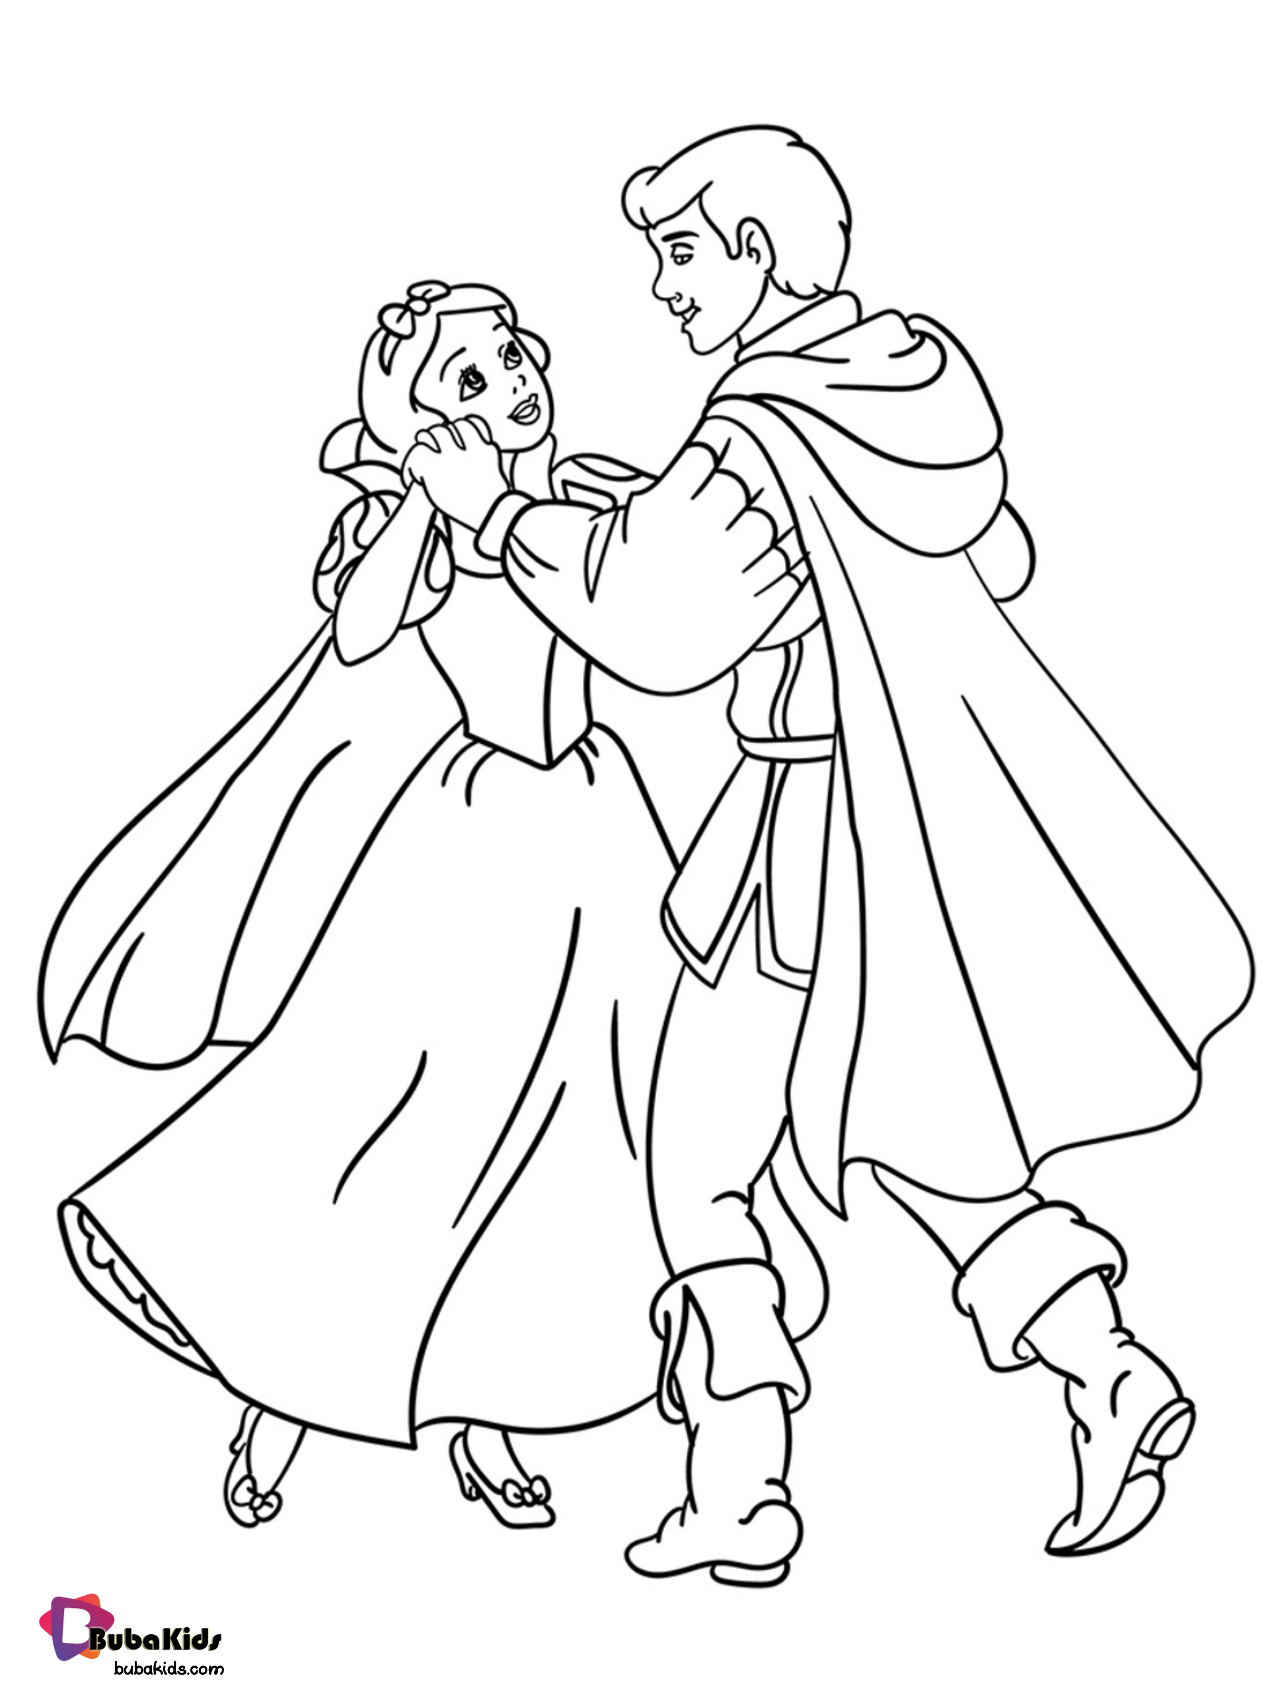 Free download and printable Snow White and Prince Charming coloring page. Wallpaper